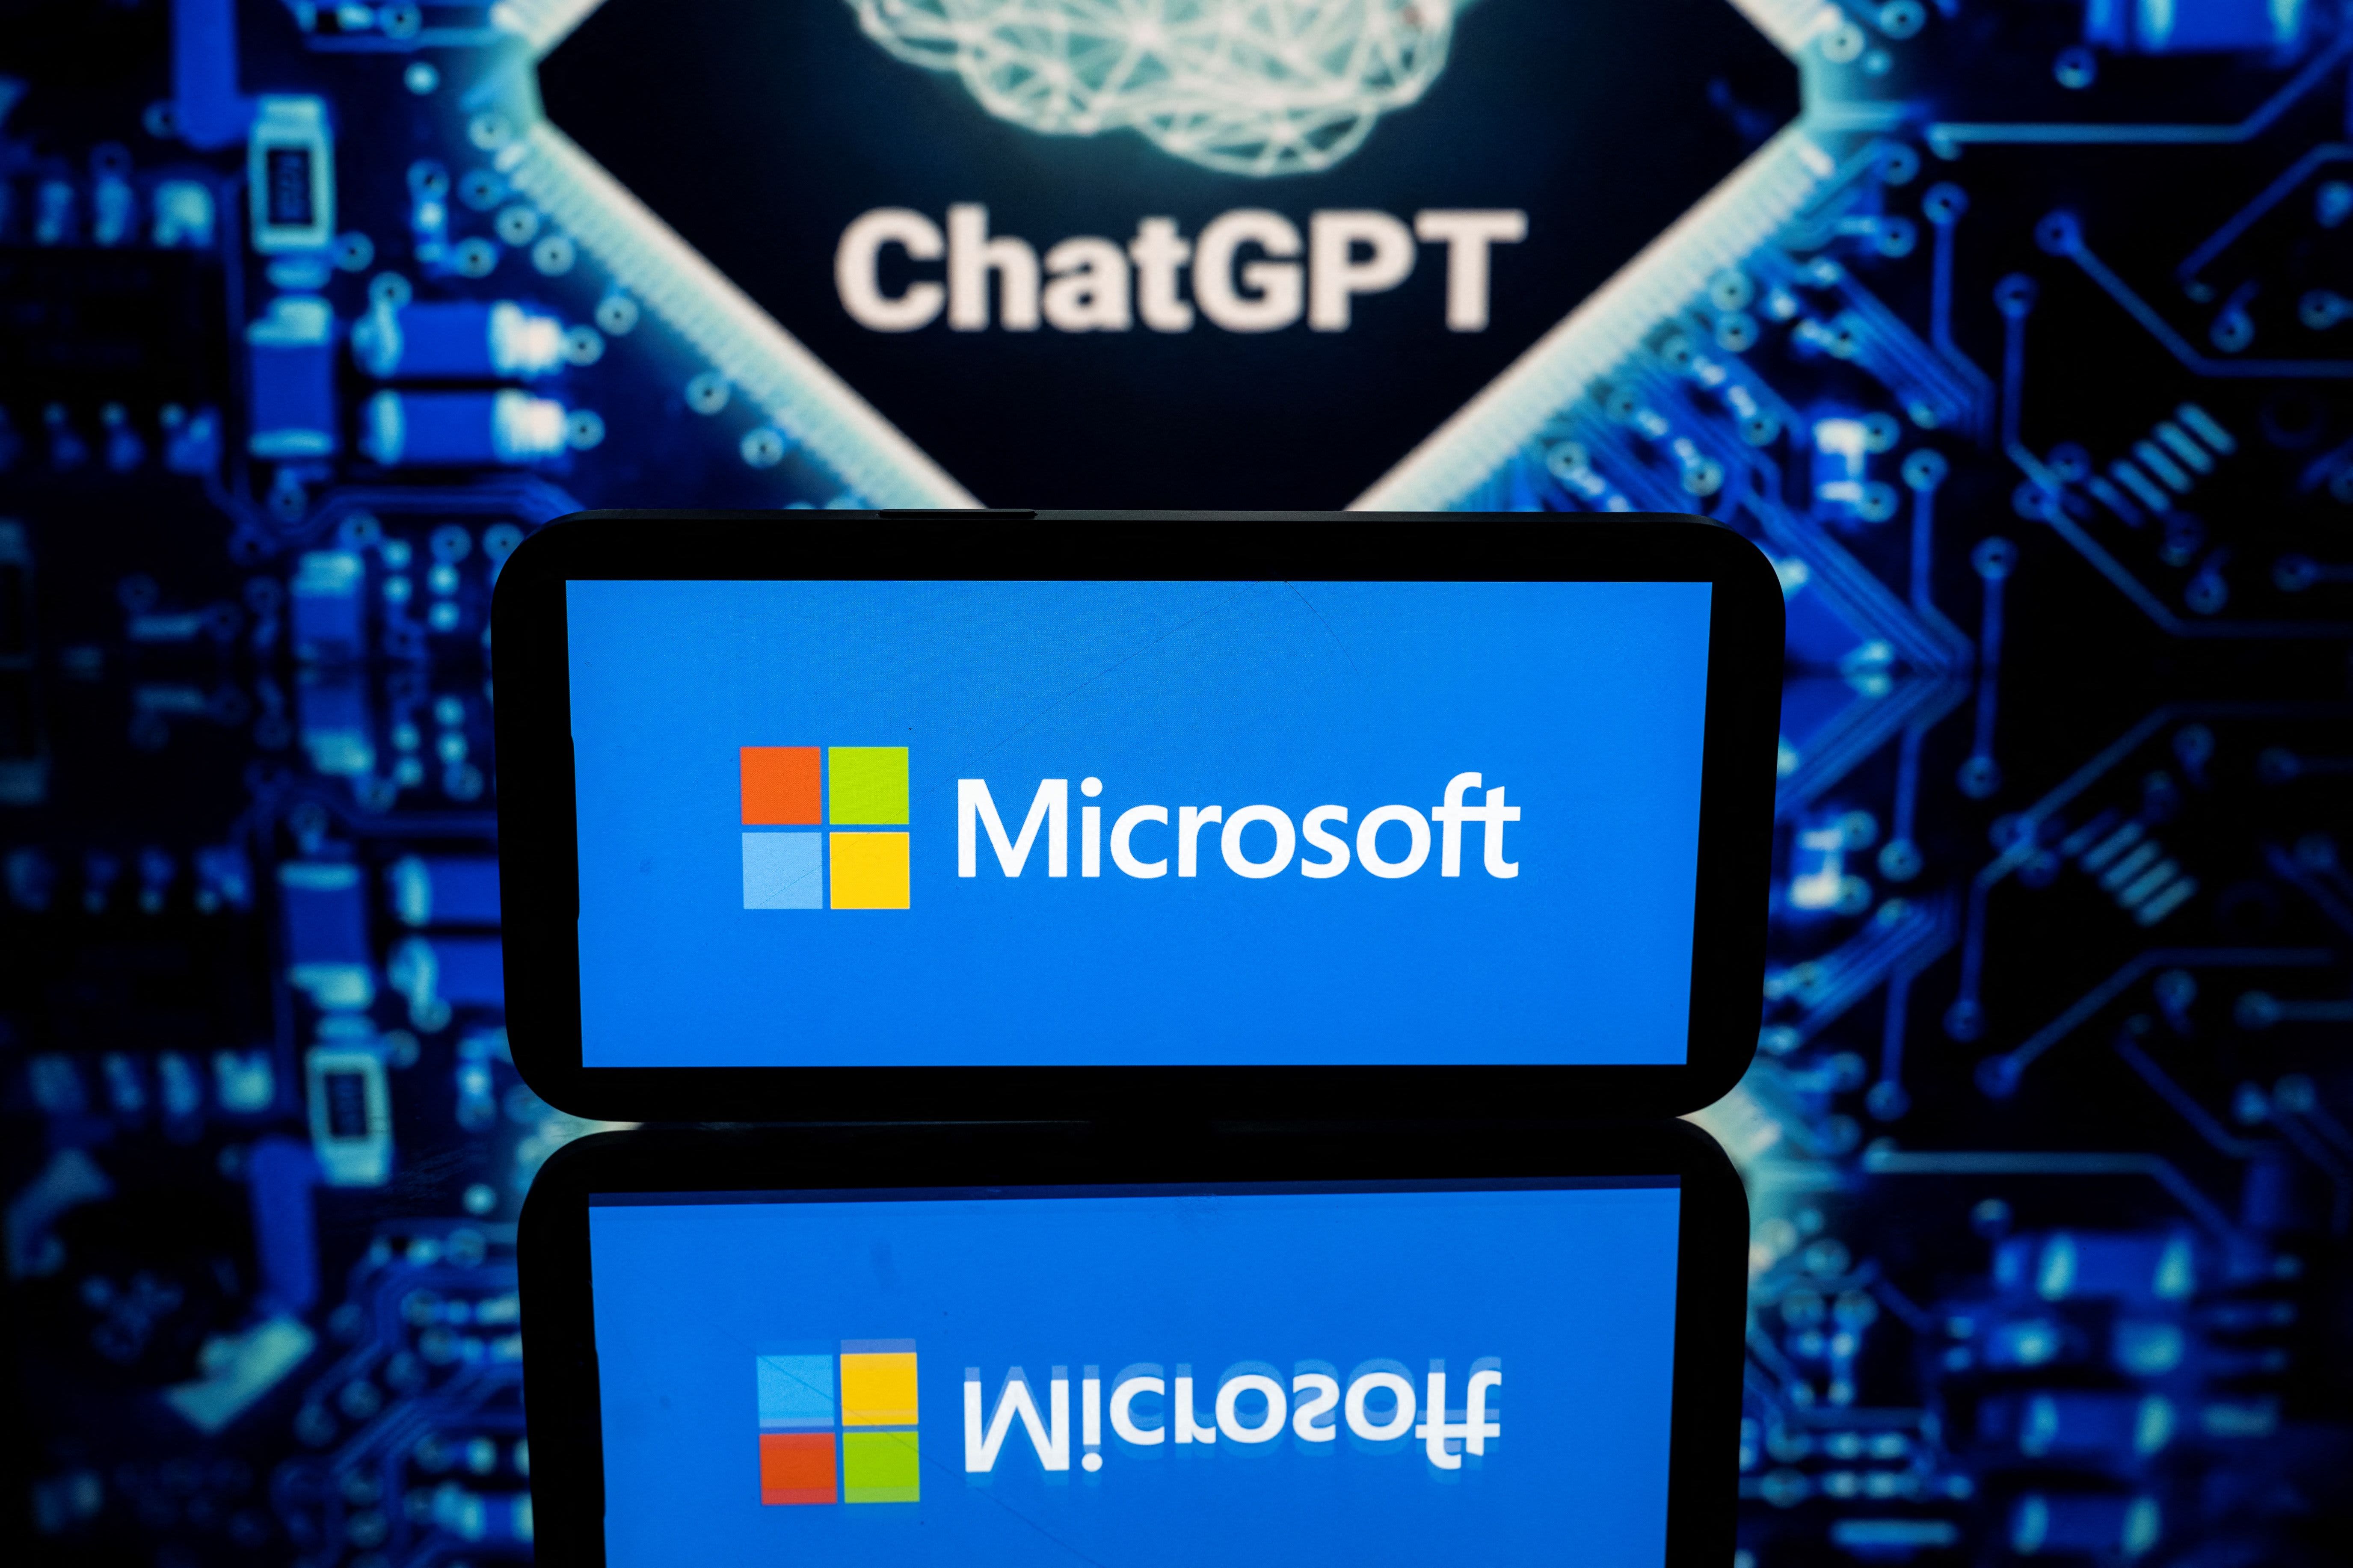 Microsoft releases another wave of A.I. features as race with Google heats up